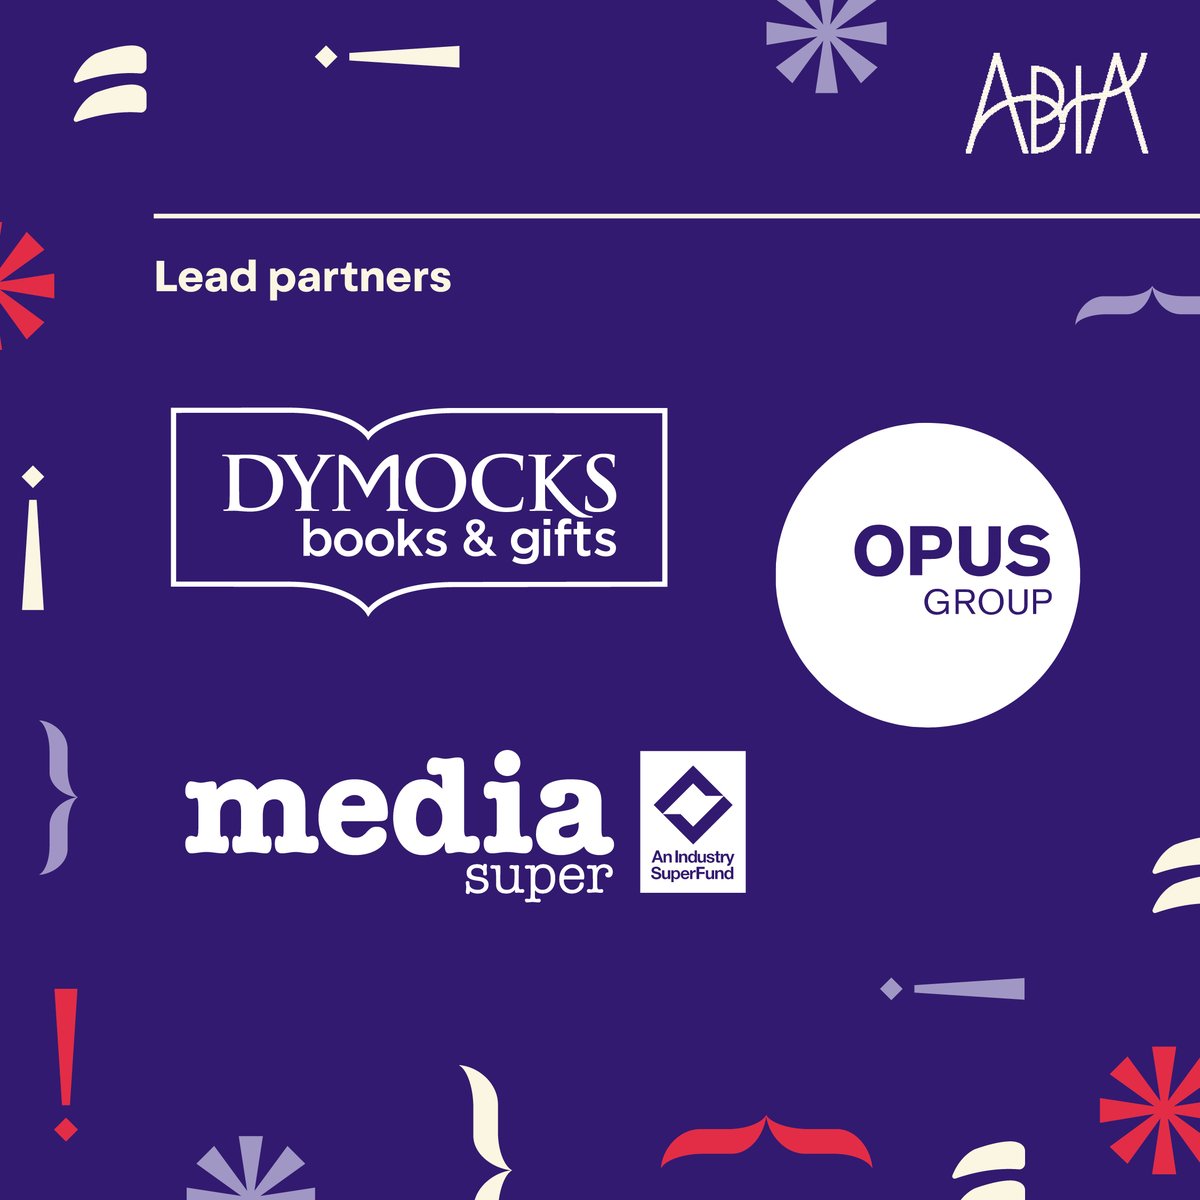 🎊 As we celebrate tonight’s Award winners, massive thanks to our sponsors, who helped make #ABIA2023 possible! 🎊 Three cheers for lead partners @MediaSuper, @DymocksBooks & OPUS Group for their support for Australian publishing, and for being such an important part of #ABIA2023